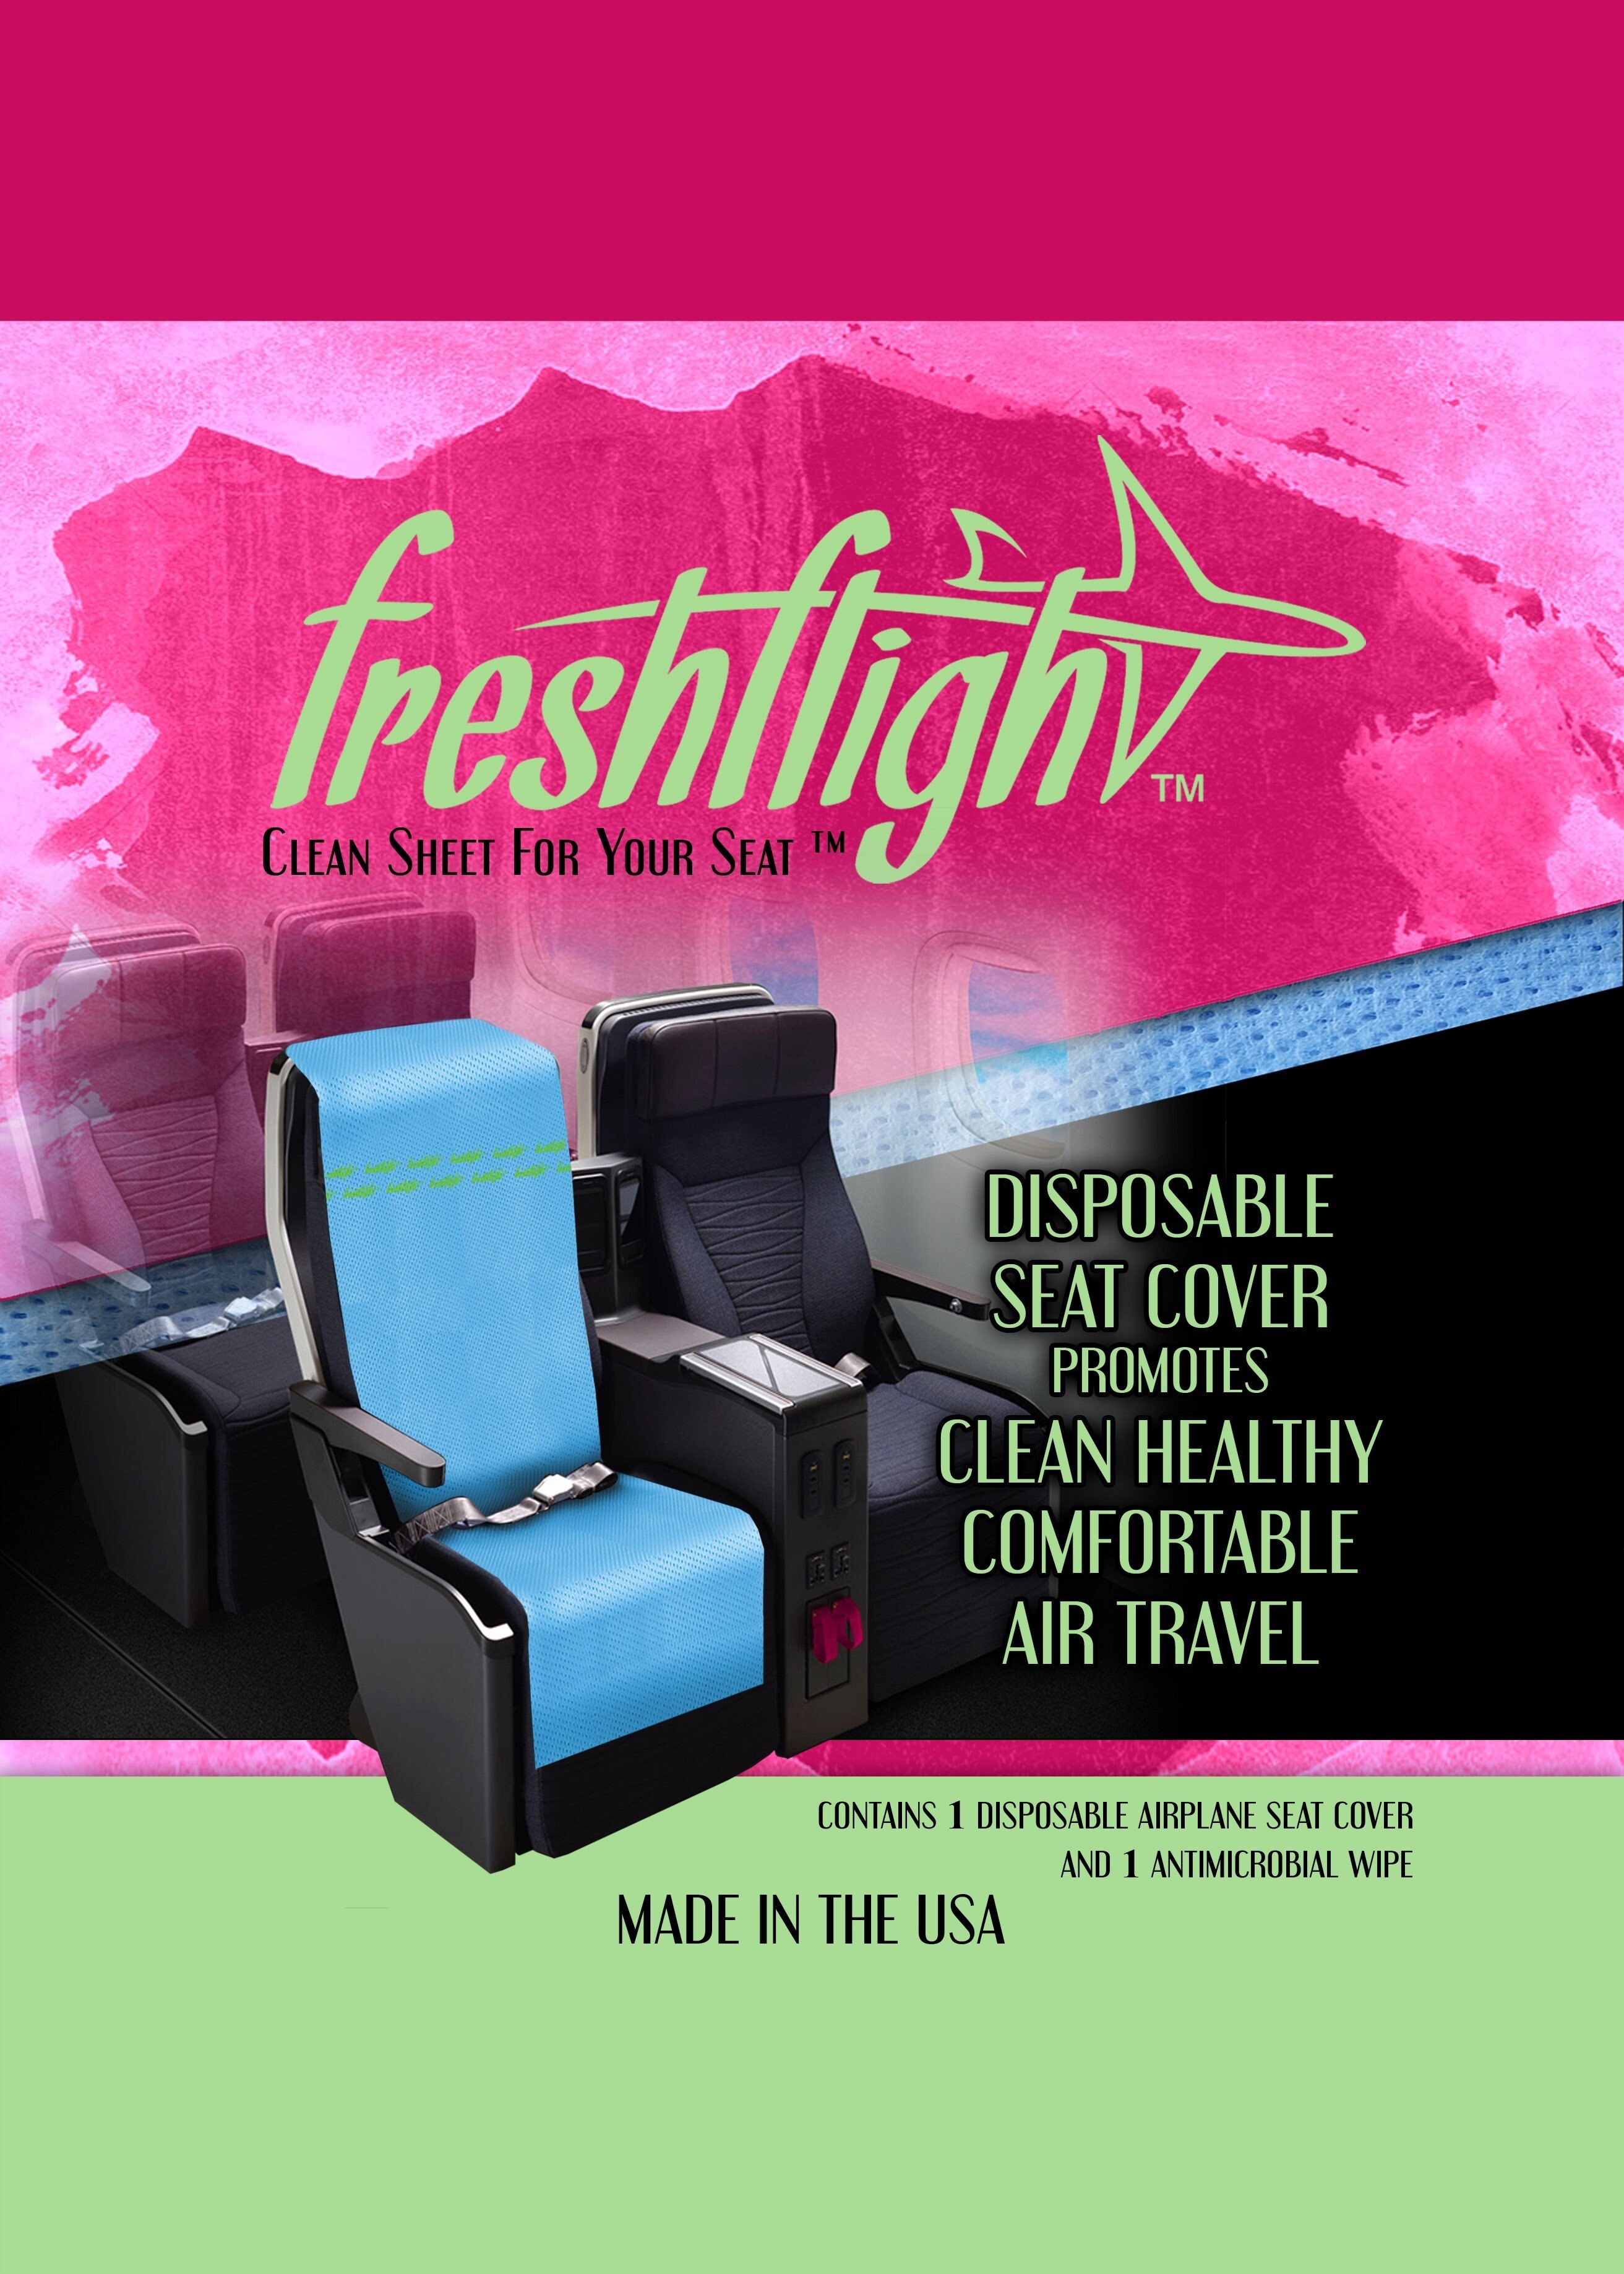 Seat Sitters Airplane Seat Cover, Tray Table Cover and Face Mask